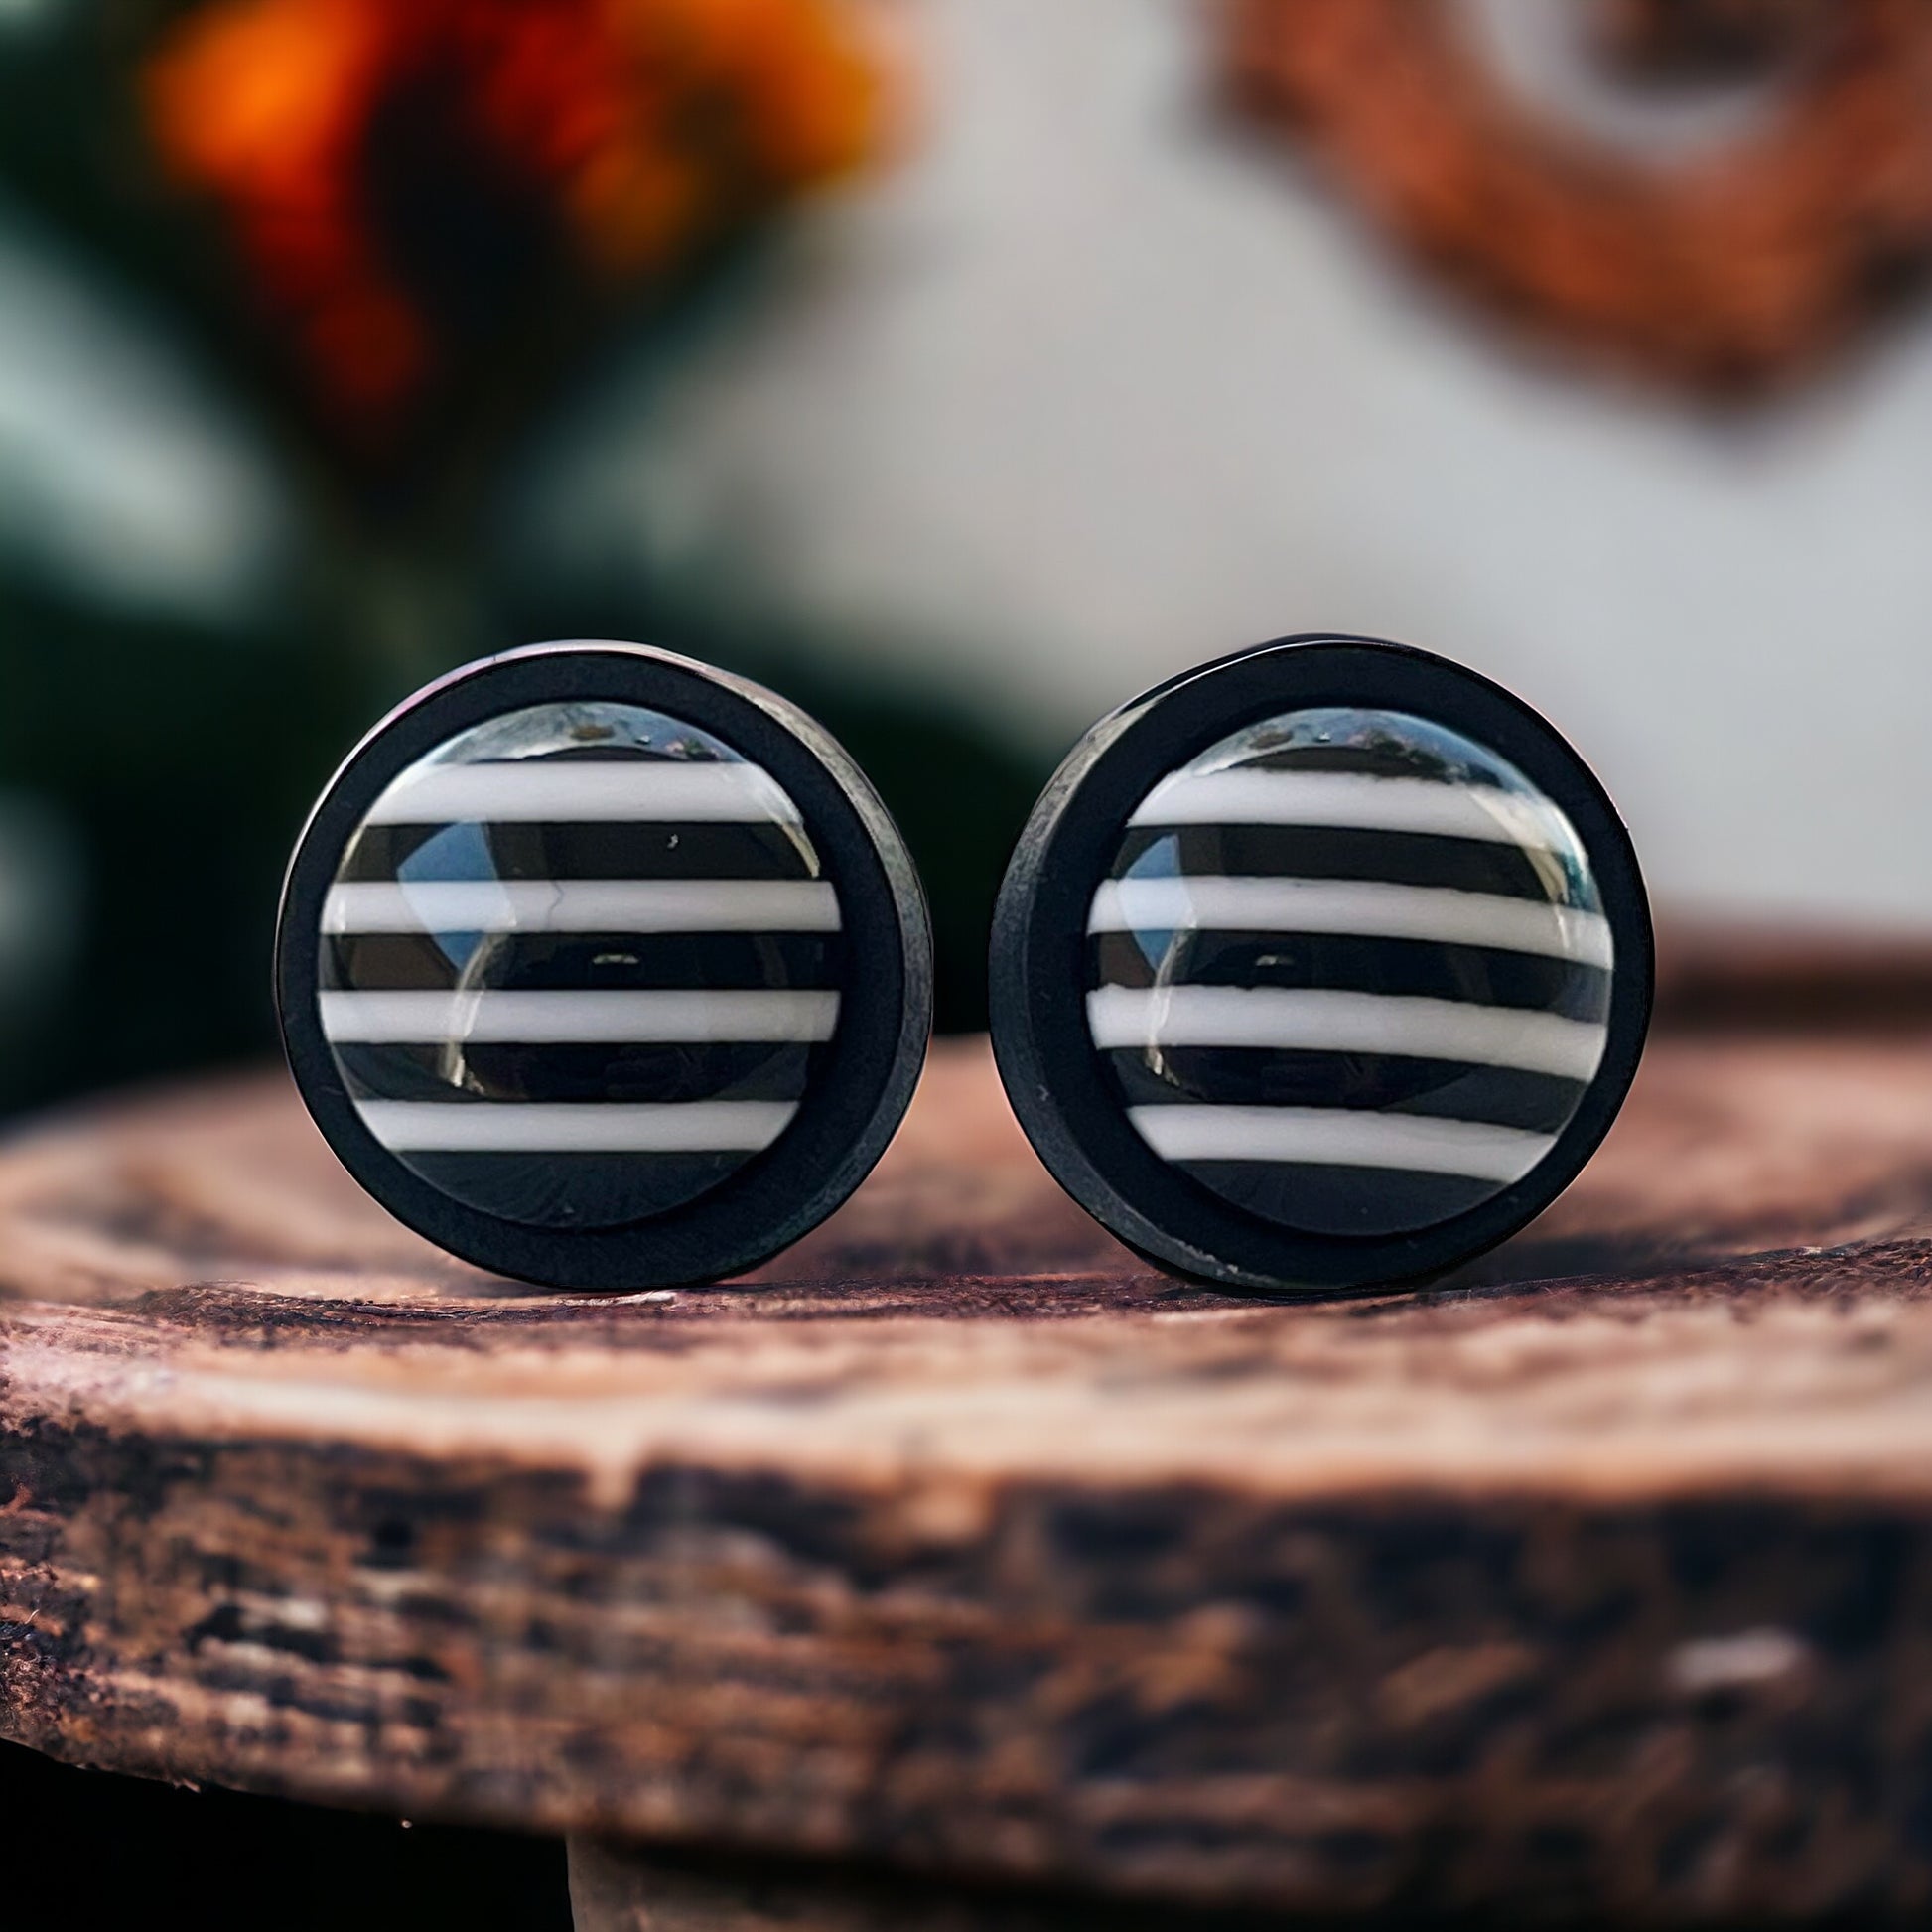 Black & White Large Striped Wood Earrings - Statement Monochrome Accessories